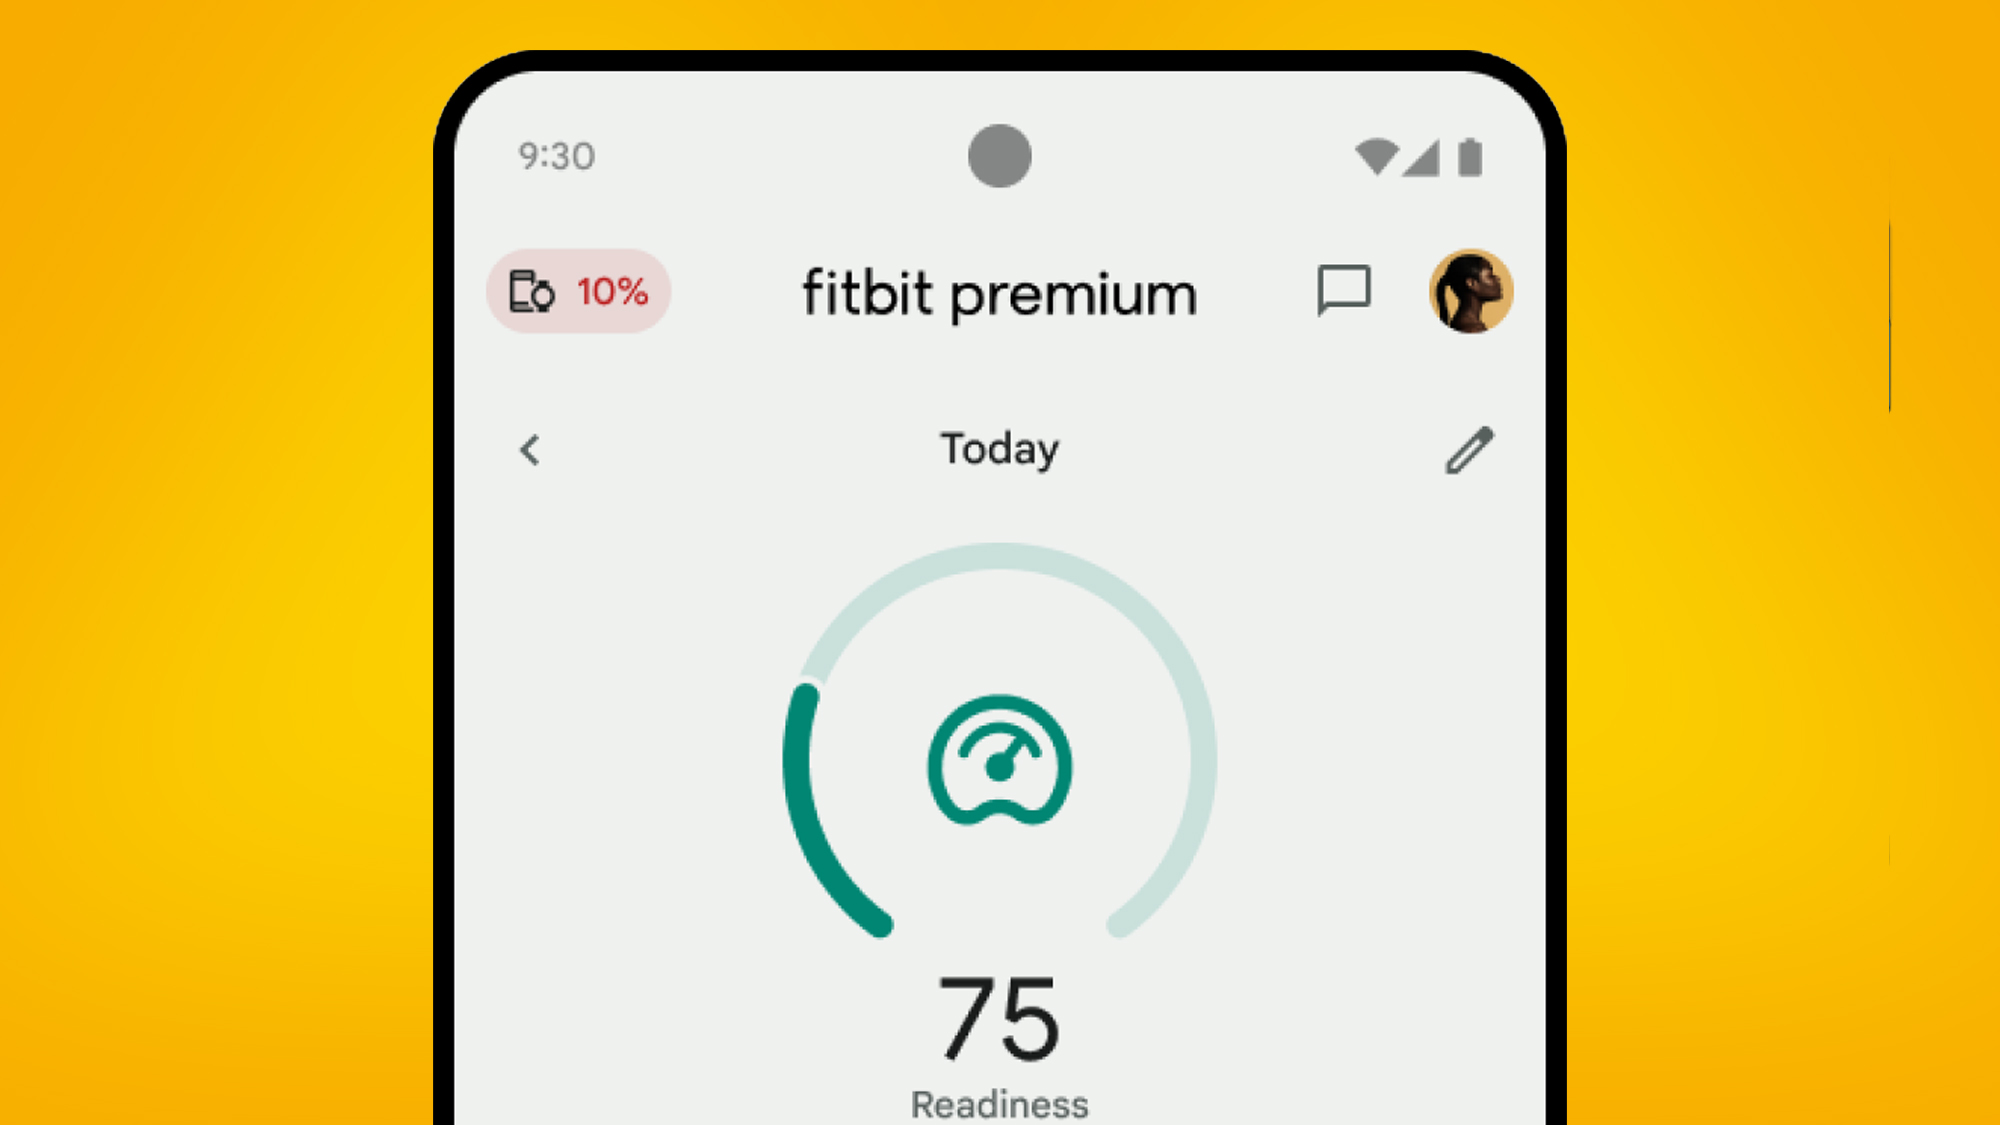 A phone on an orange background showing the Fitbit app